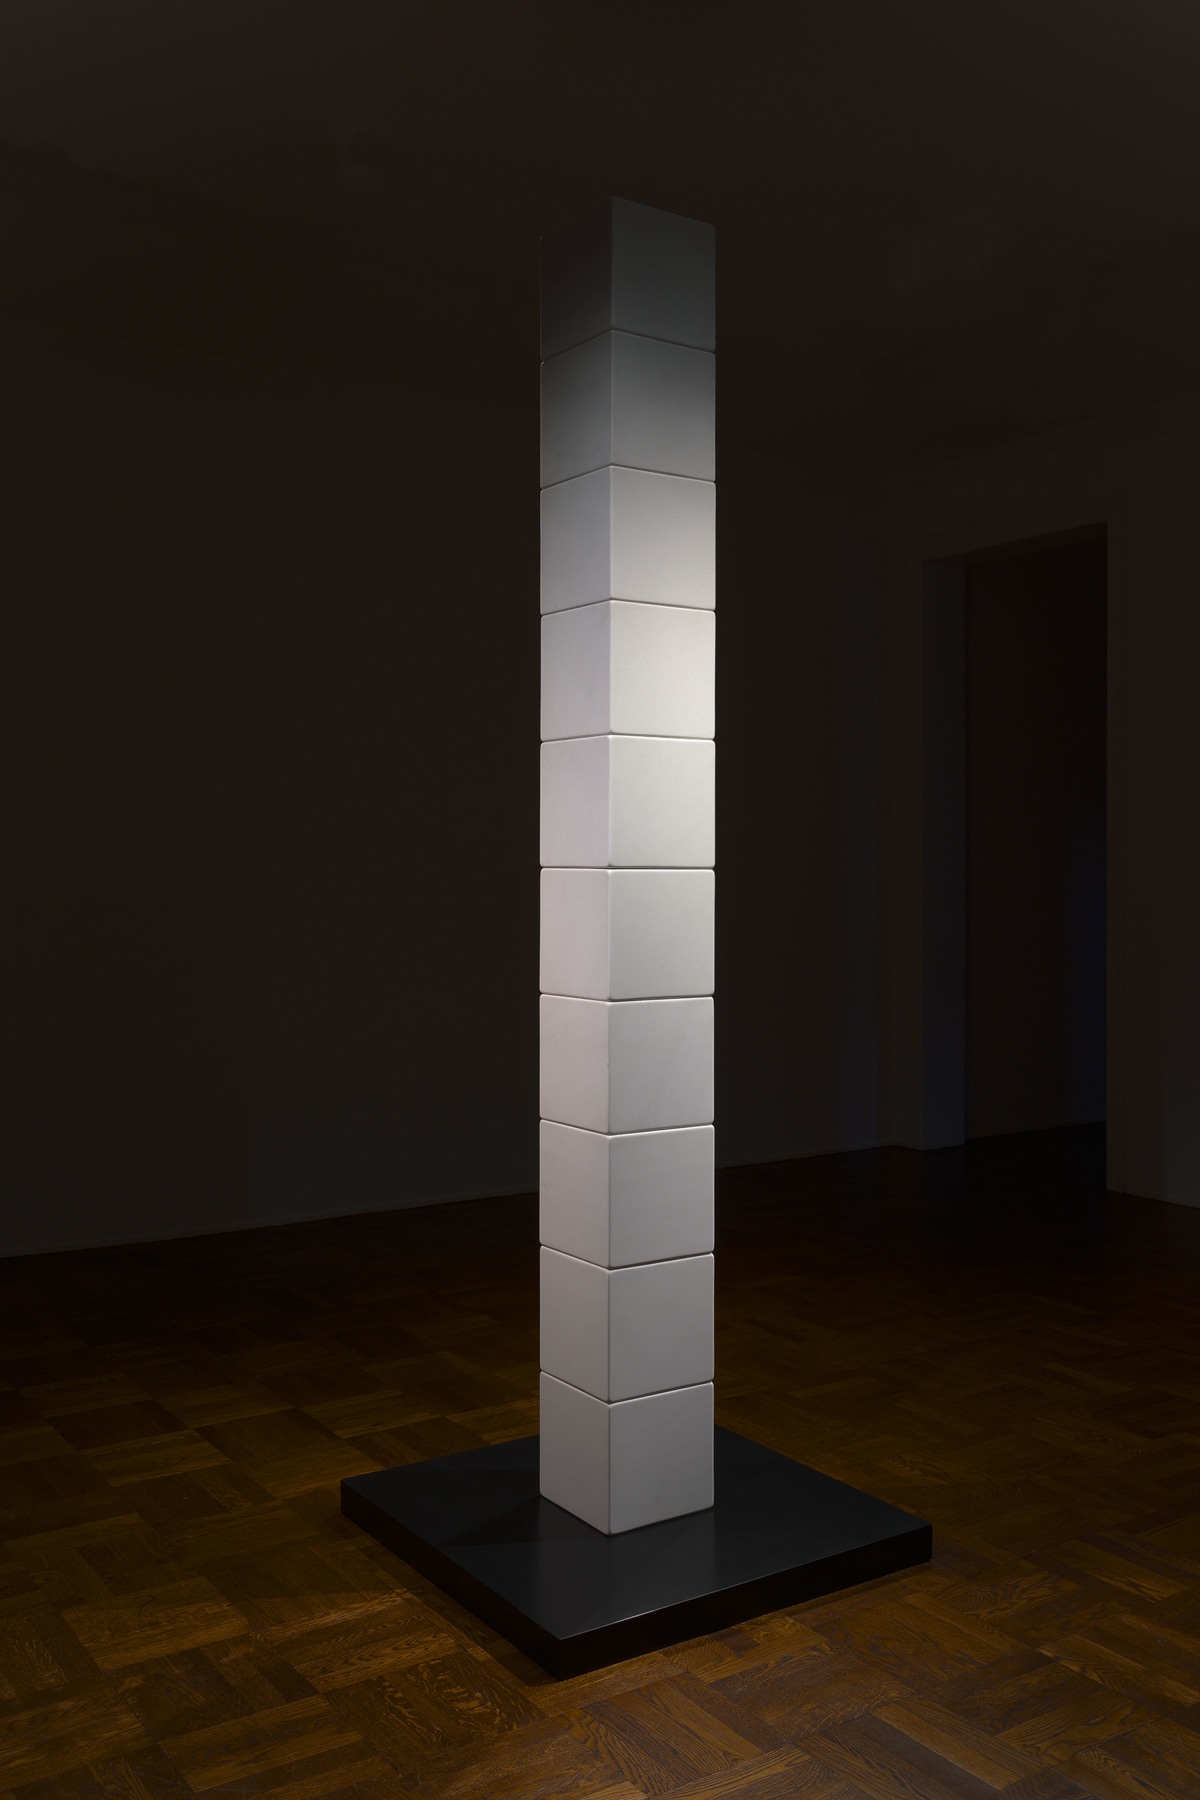 JAMES LEE BYARS, The Figure of Death and The Moon Column, New York, 2015, Installation Image 2